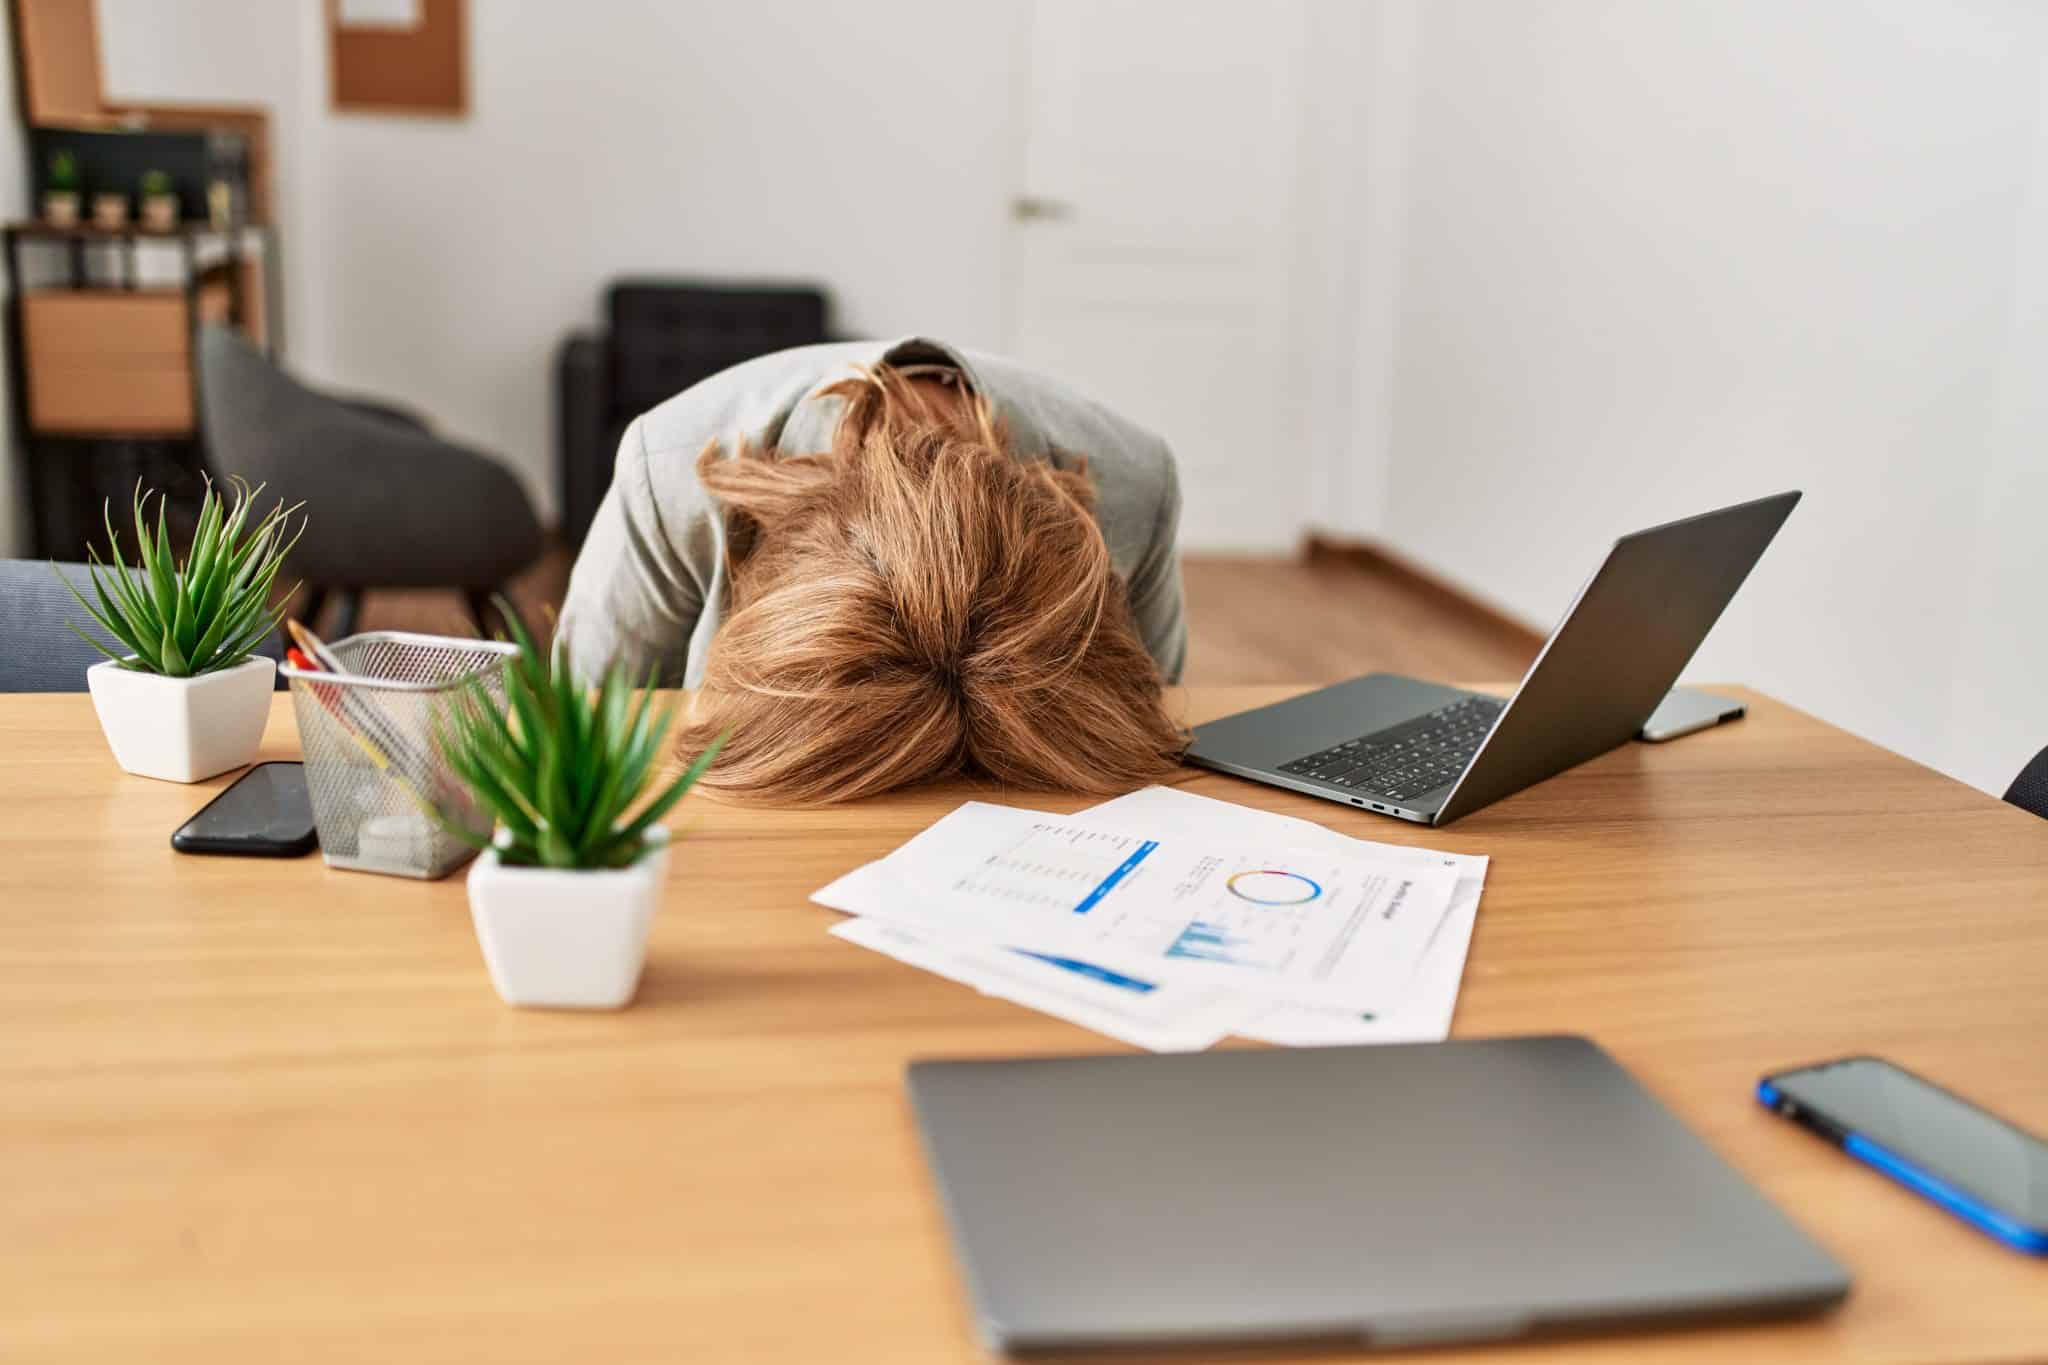 A woman rests her head on her work table. This scene underscores the importance of managing workloads and prioritizing well-being to prevent burnout.